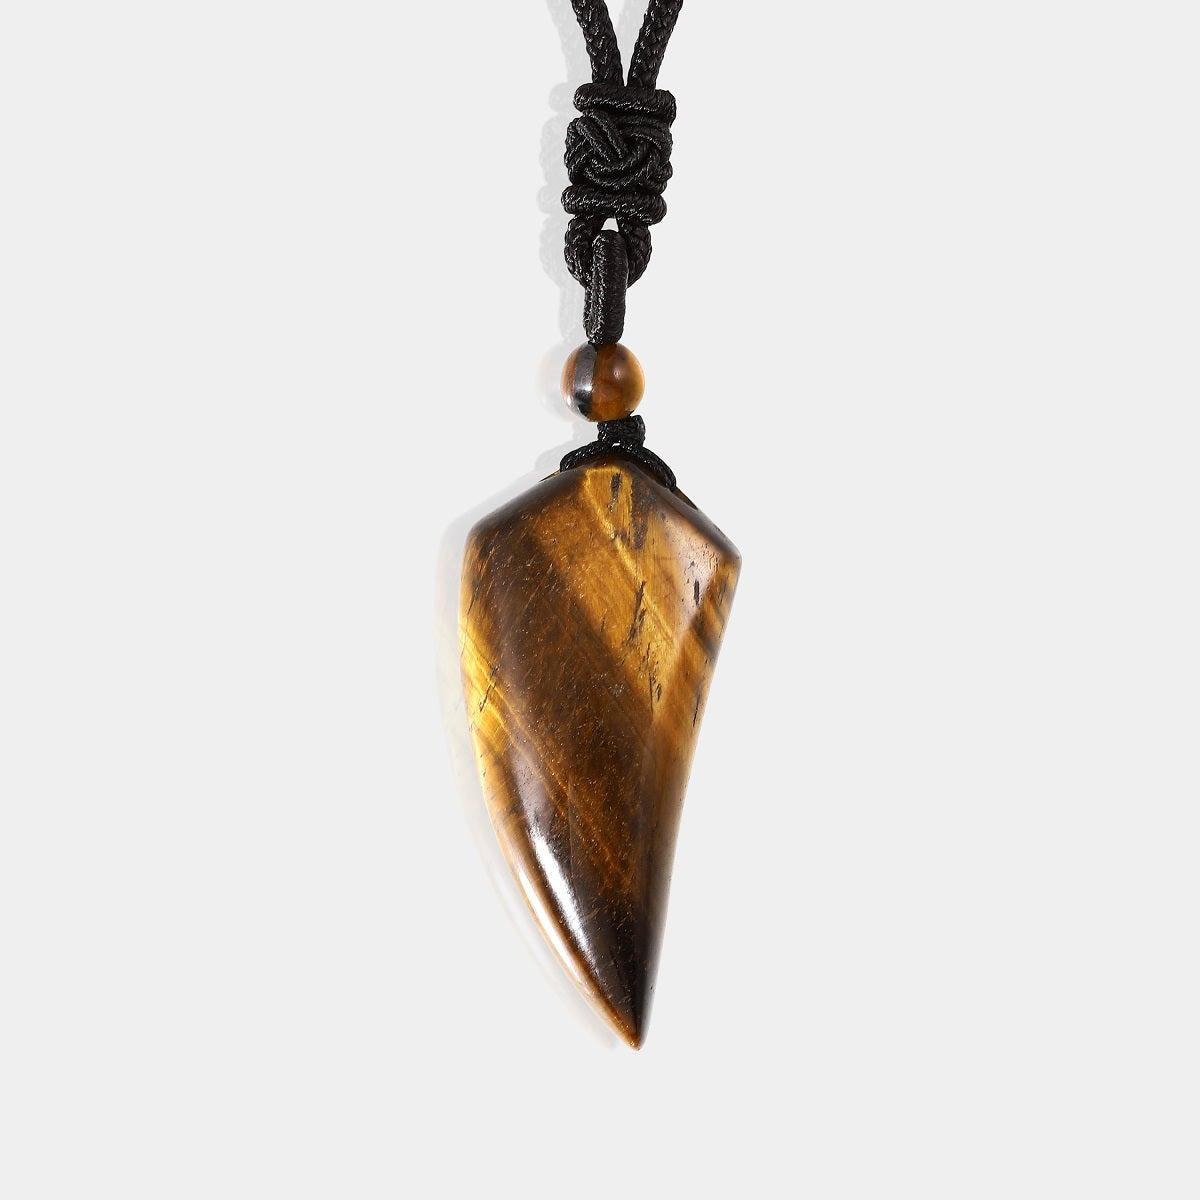 A striking golden-brown tiger's eye gemstone with chatoyant bands, radiating a captivating shimmer and depth.